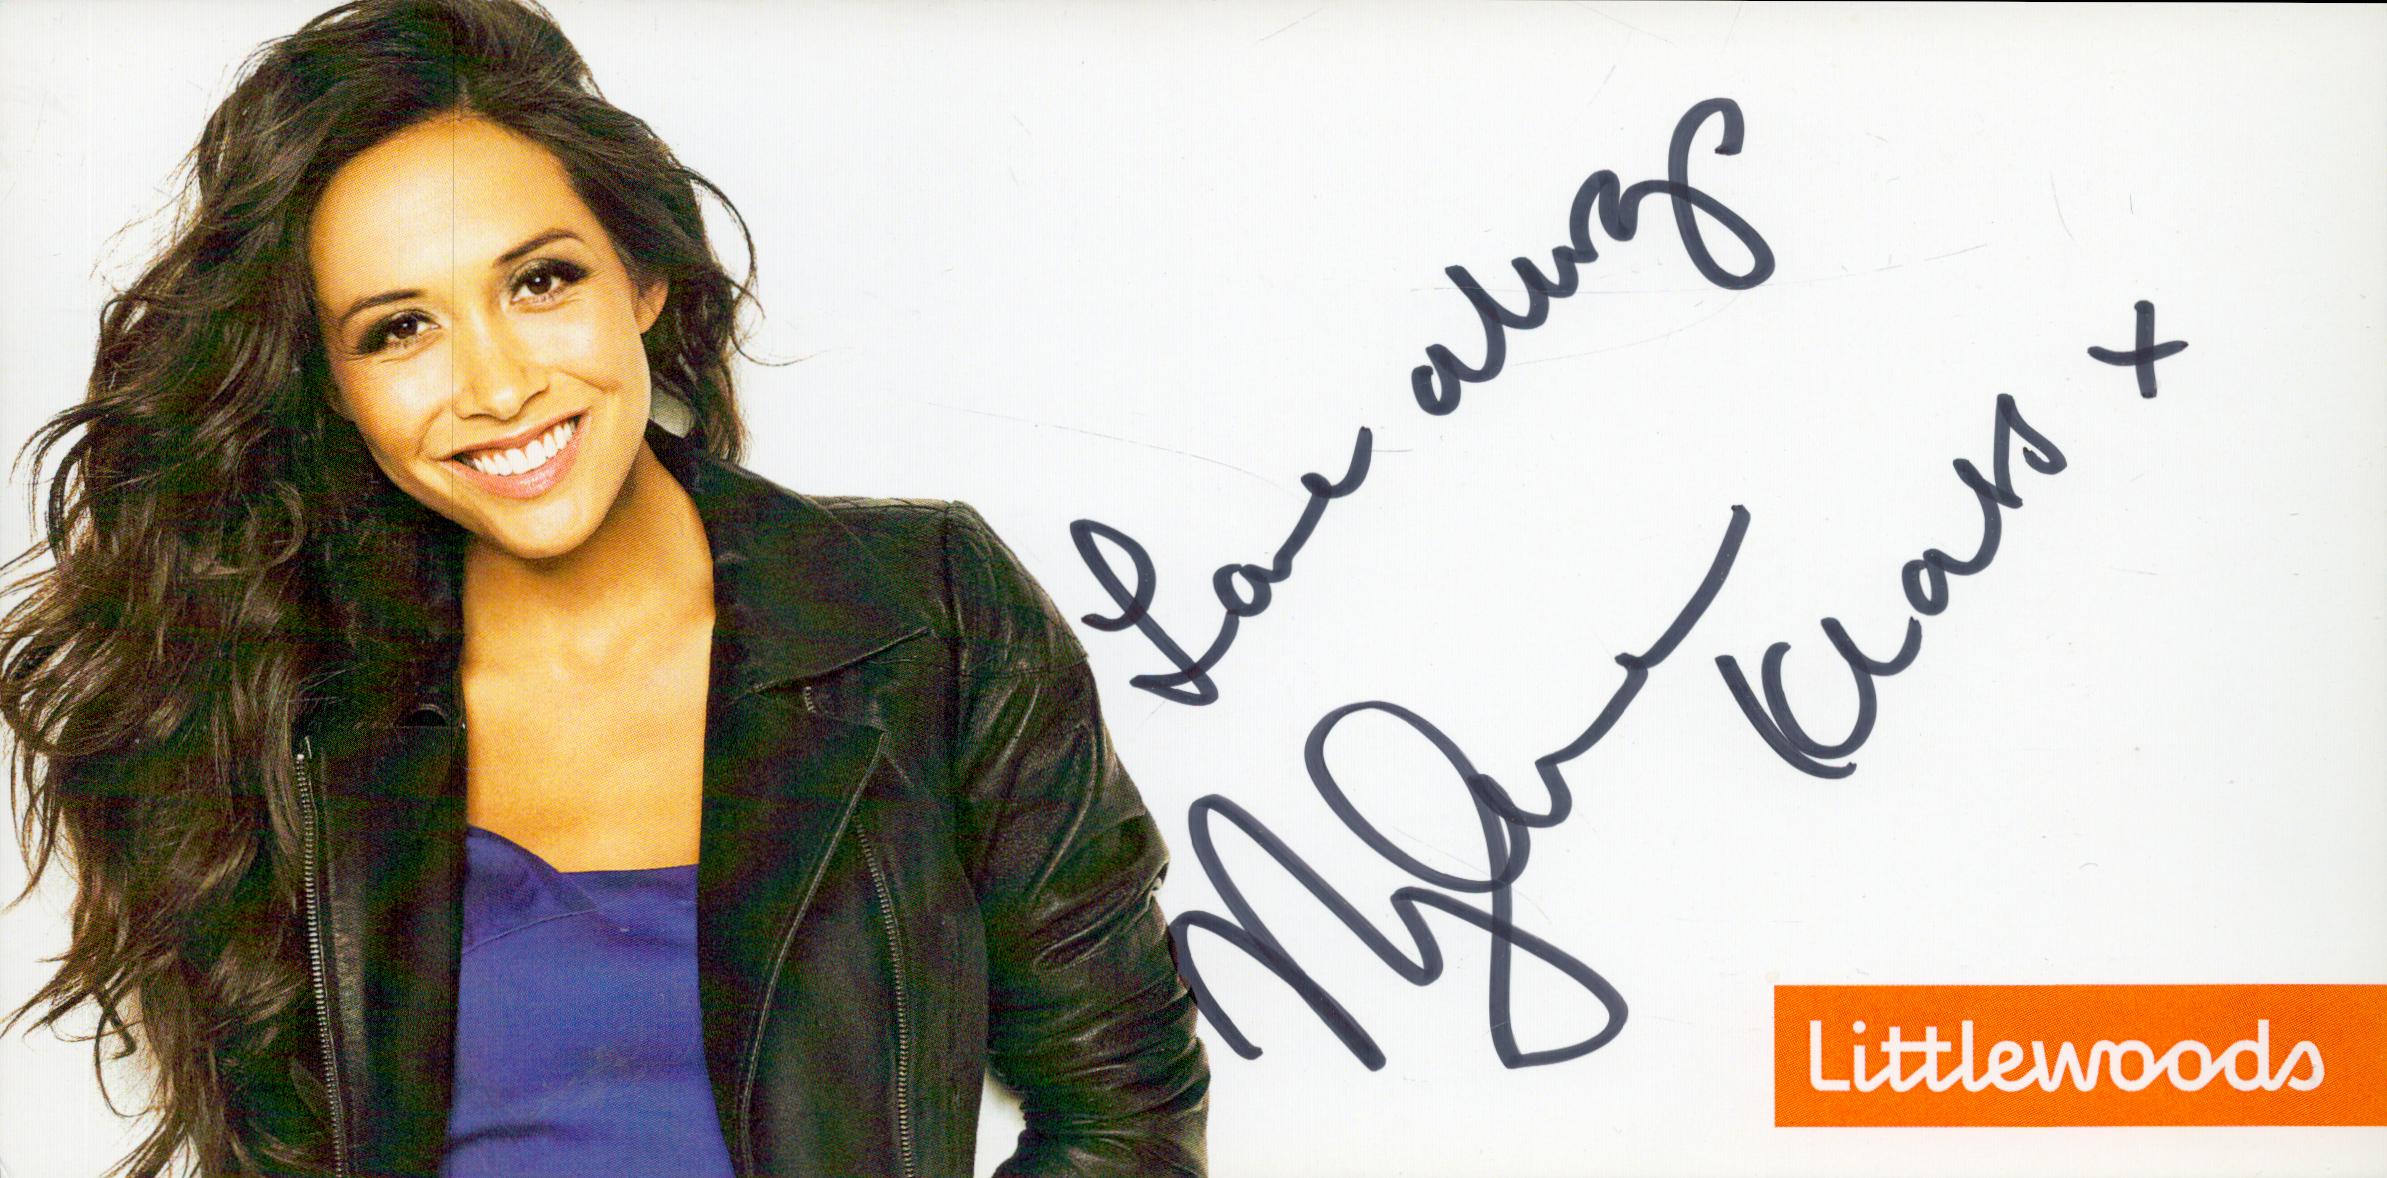 Myleene Klass signed 8x4 inch colour Littlewoods promo photo. Good condition. All autographs are